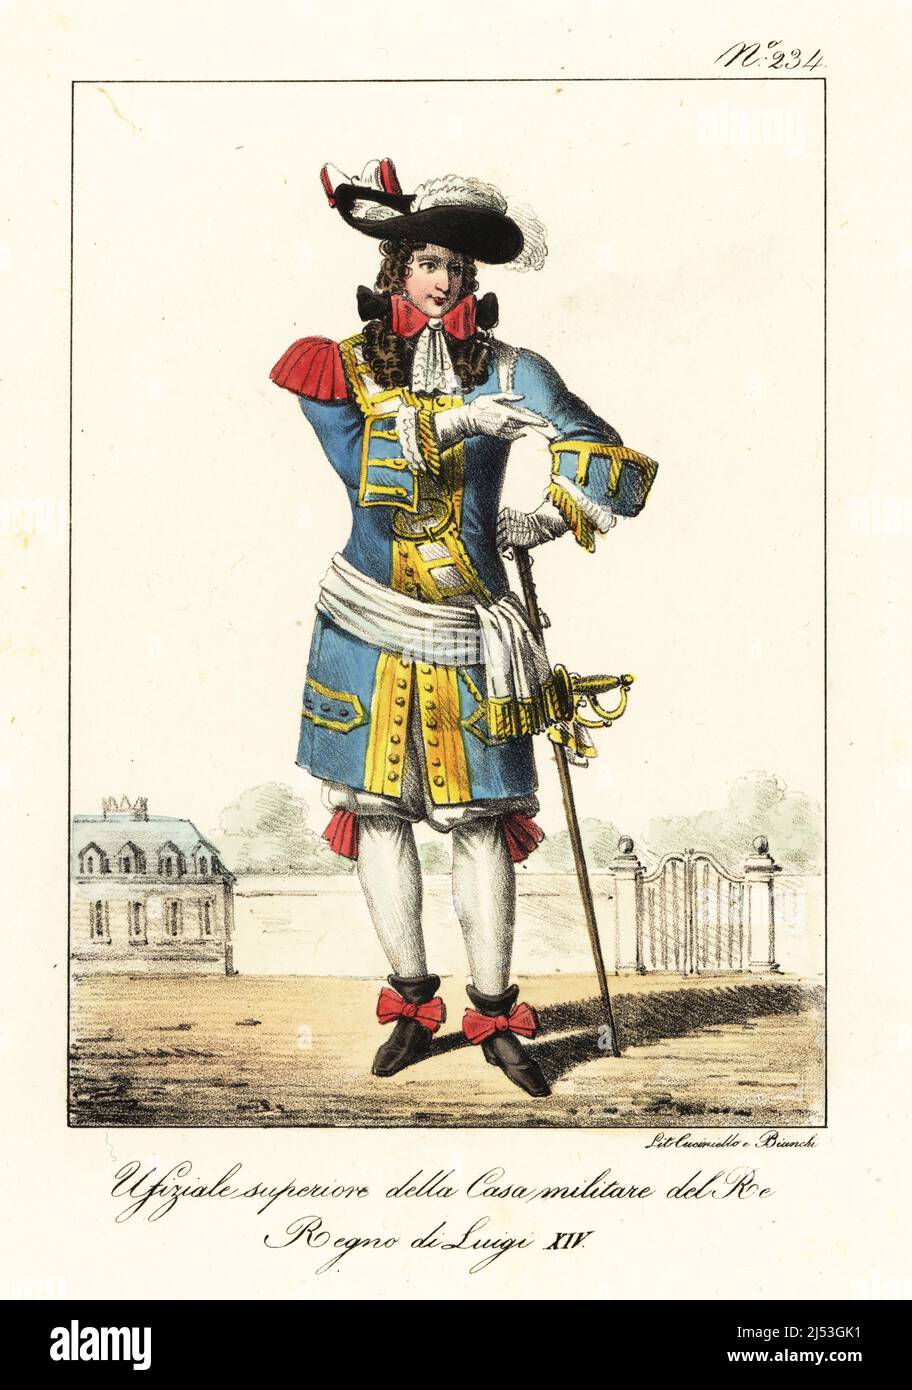 Uniform of a Superior Officer in the French Military Household of the King of France, reign of King Louis XIV. Plumed hat, blue coat with epaulette and gold frogging, cravatte with ribbons, pantalons, hose, ribbon bootlets, armed with sword and staff. Officier superieur de la Maison Militaire du Roi. Regne de Louis XIV. Handcoloured lithograph by Lorenzo Bianchi and Domenico Cuciniello after Hippolyte Lecomte from Costumi civili e militari della monarchia francese dal 1200 al 1820, Naples, 1825. Italian edition of Lecomte’s Civilian and military costumes of the French monarchy from 1200 to 182 Stock Photo